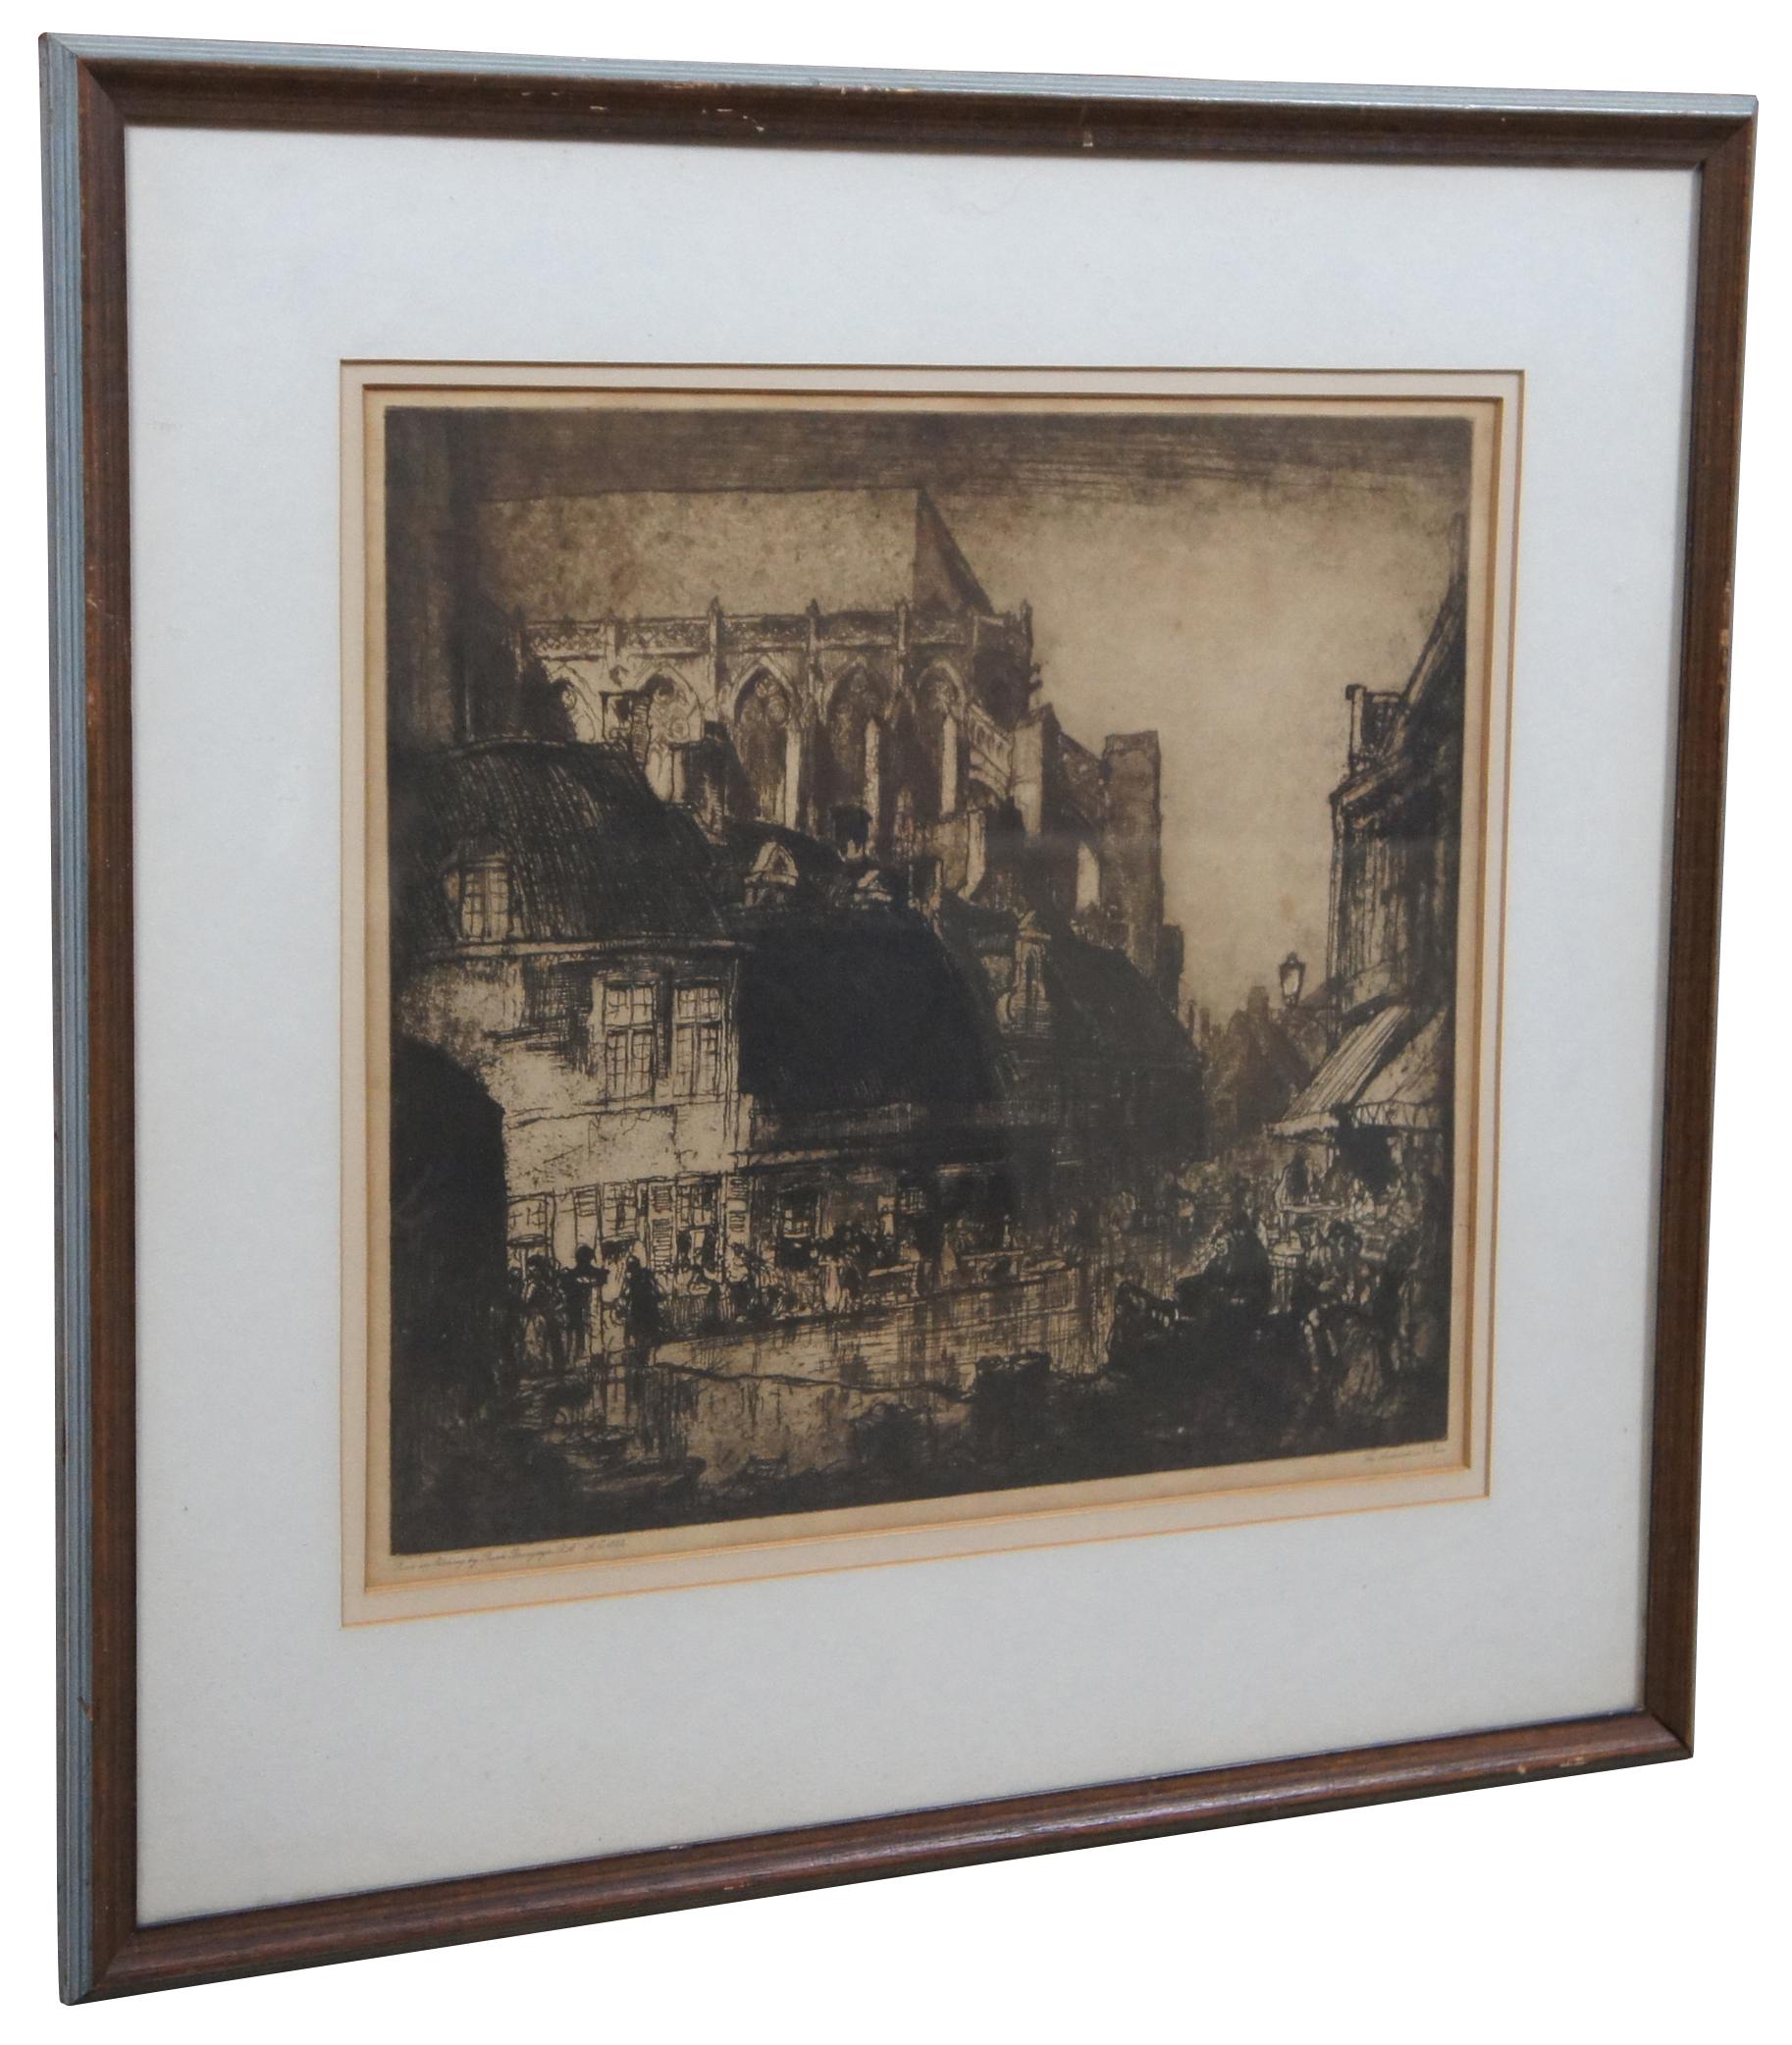 Antique Architectural Press Cathedral Cityscape Etching After Frank Brangwyn In Good Condition For Sale In Dayton, OH